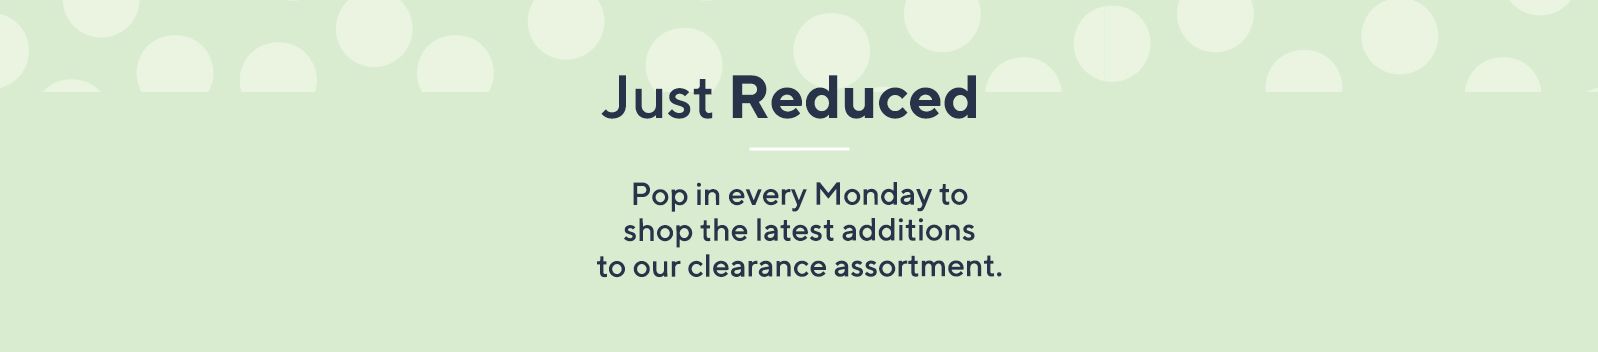 Just Reduced.  Pop in every Monday to shop the latest additions to our clearance assortment.